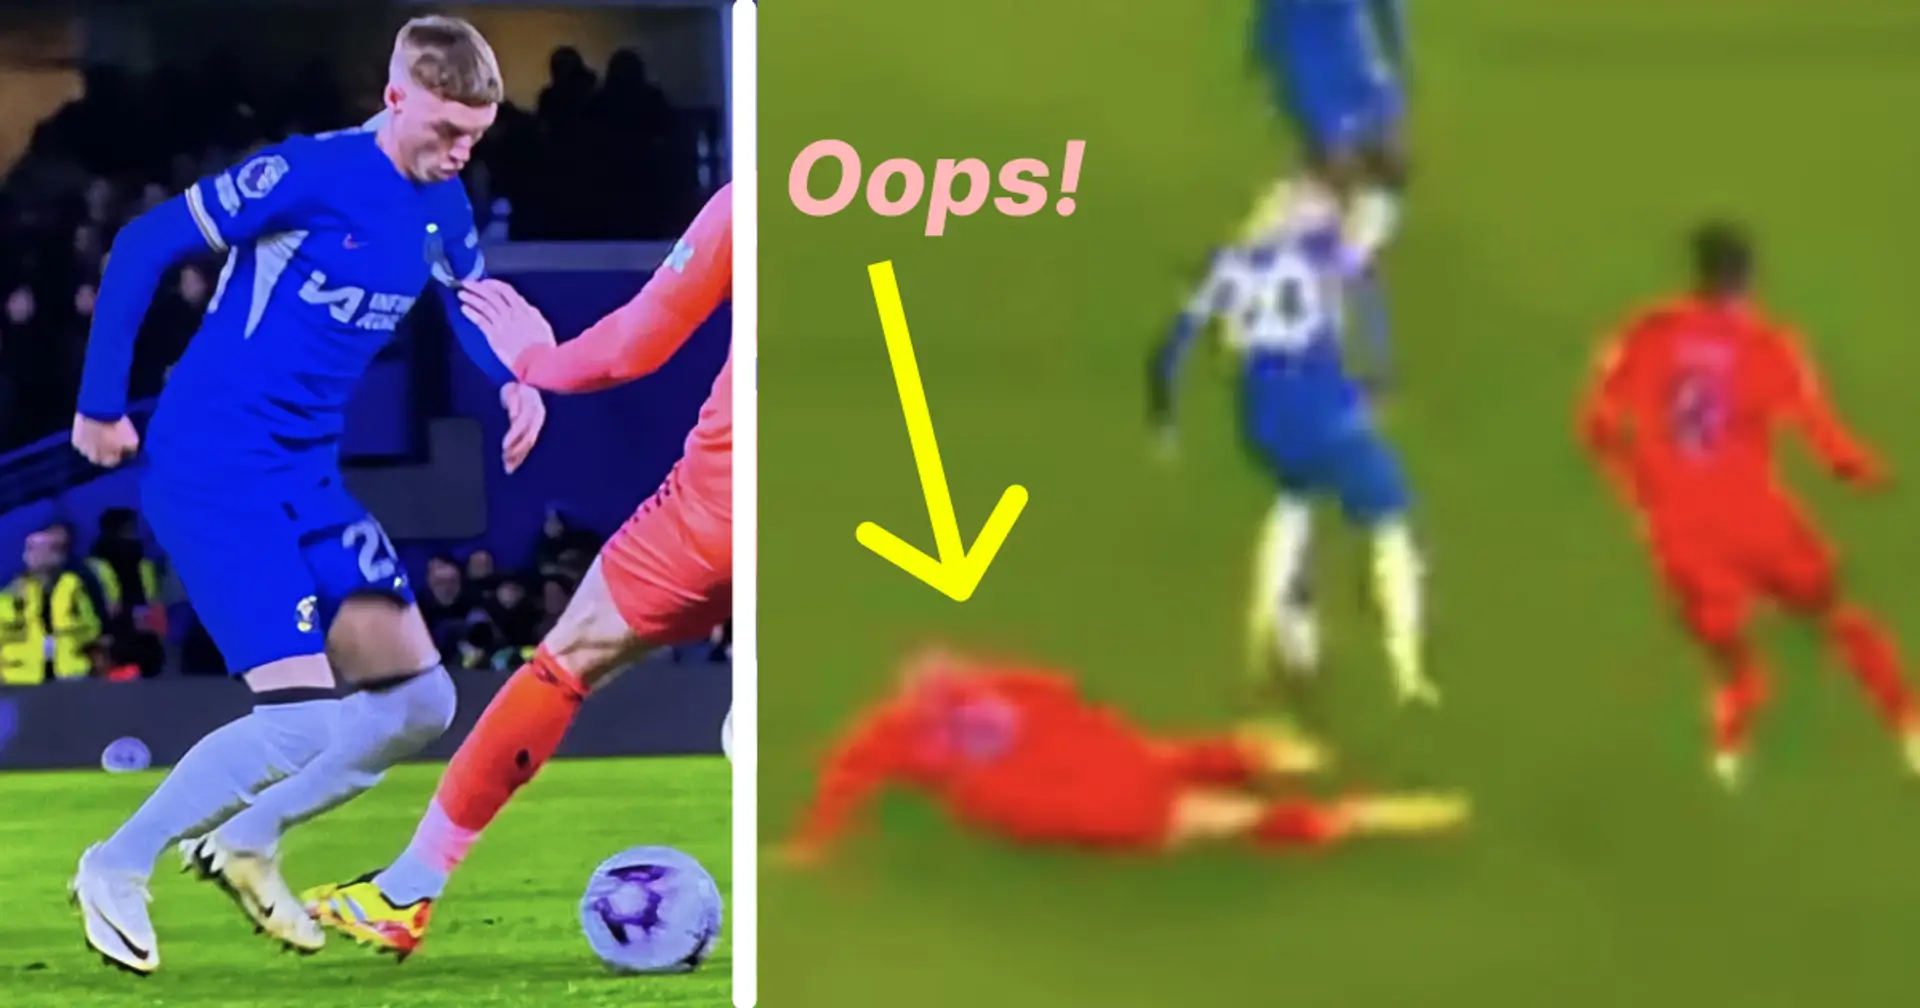 '£10m off his fee': Fans react to Cole Palmer destroying ONE player ahead of Everton goal